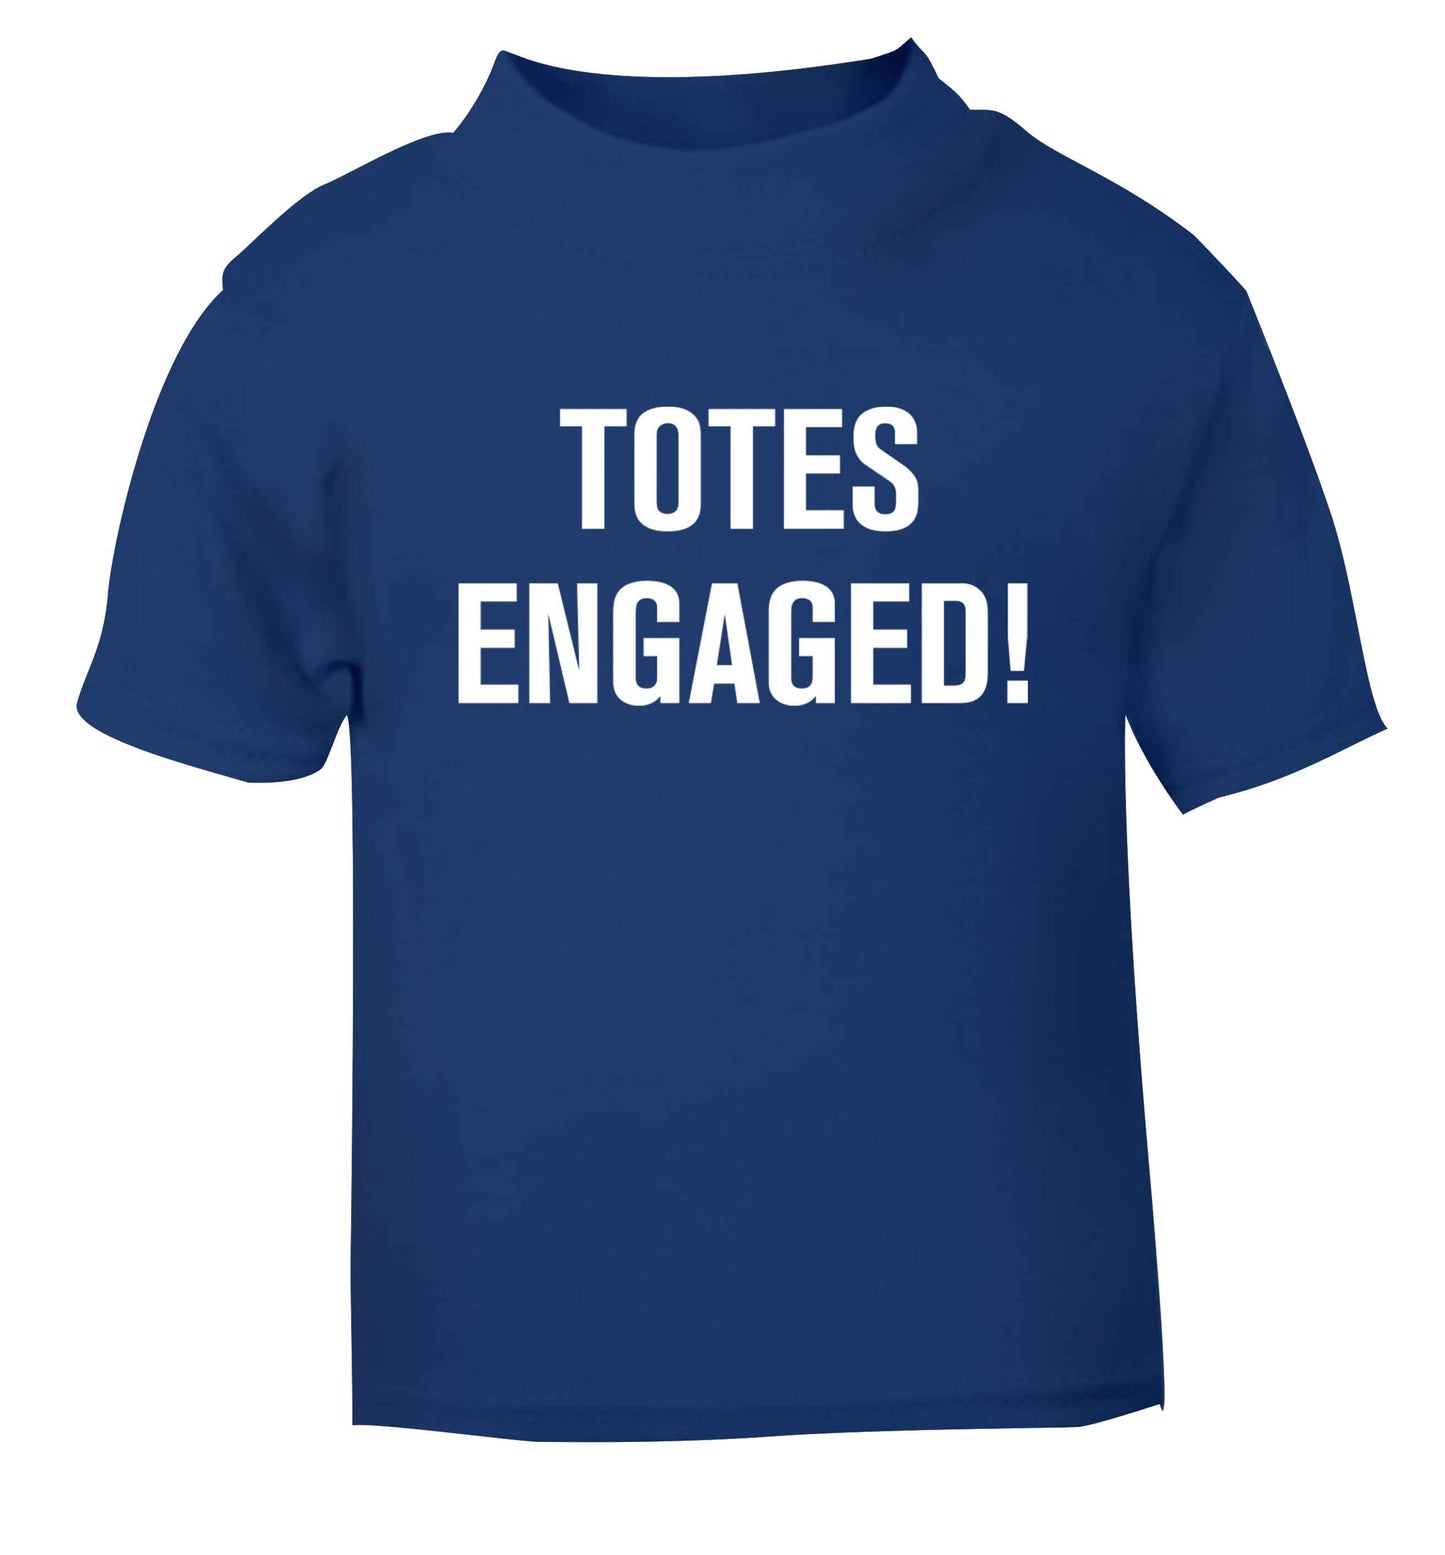 Totes engaged blue baby toddler Tshirt 2 Years